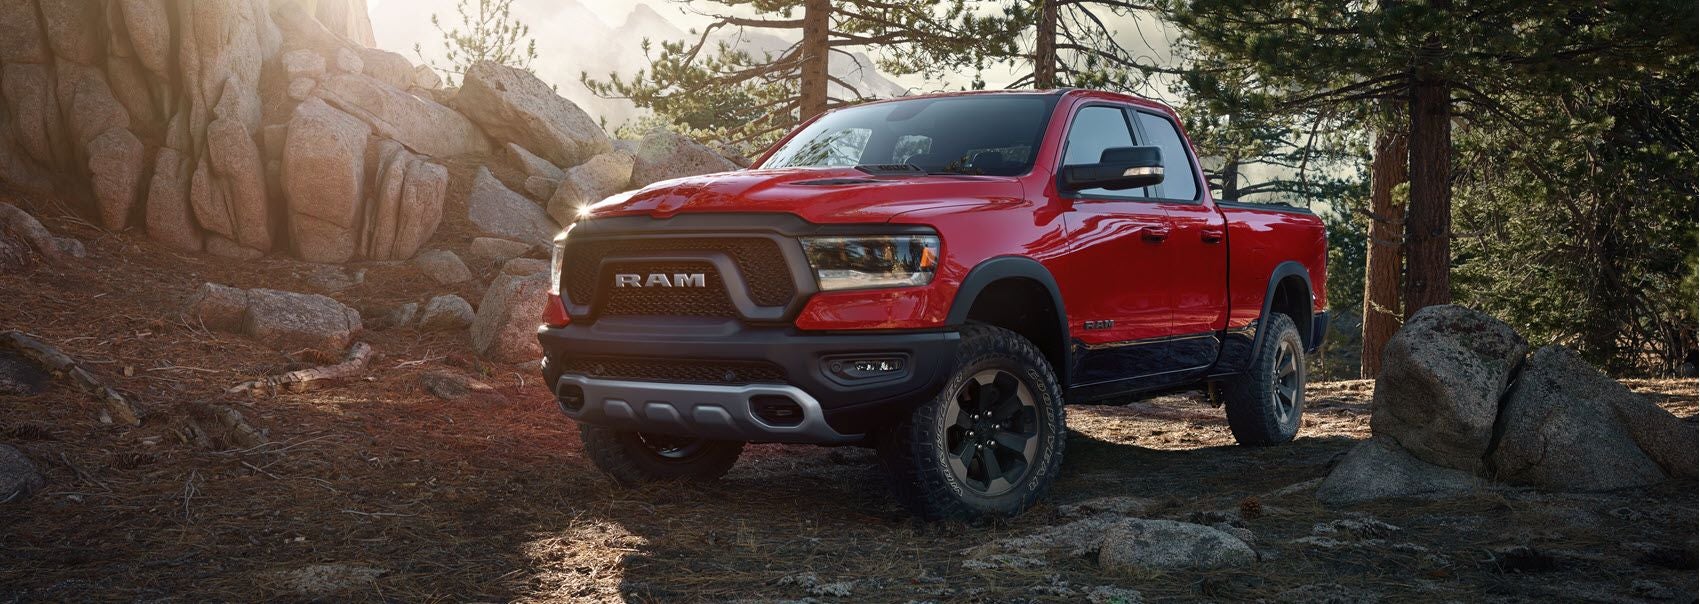 RAM 1500 Snipped in Red